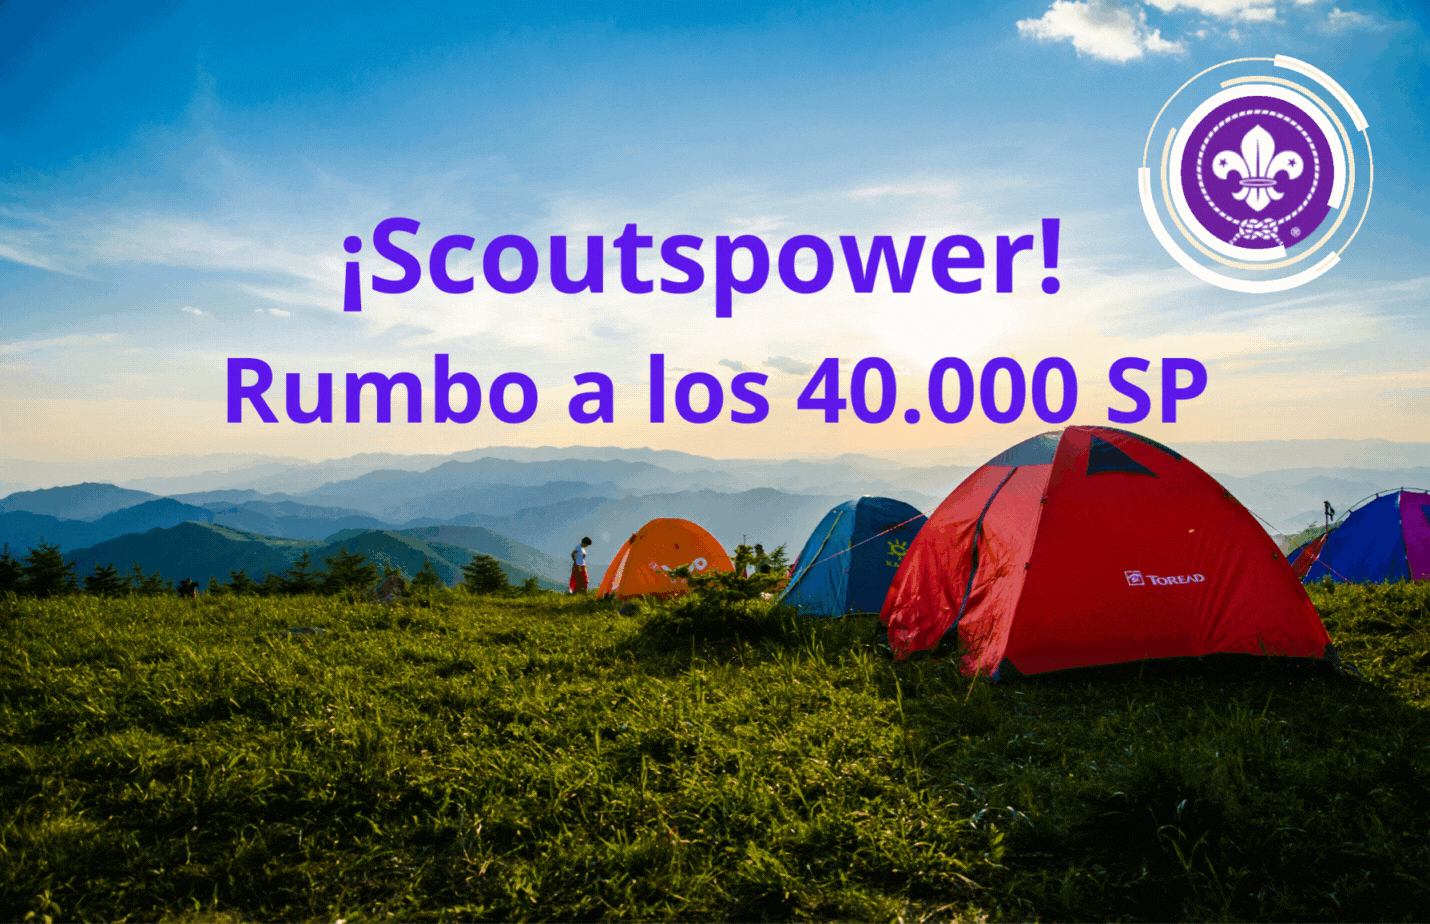 ¡Scoutspower!  Rumbo a los 40.000 SP (1).gif